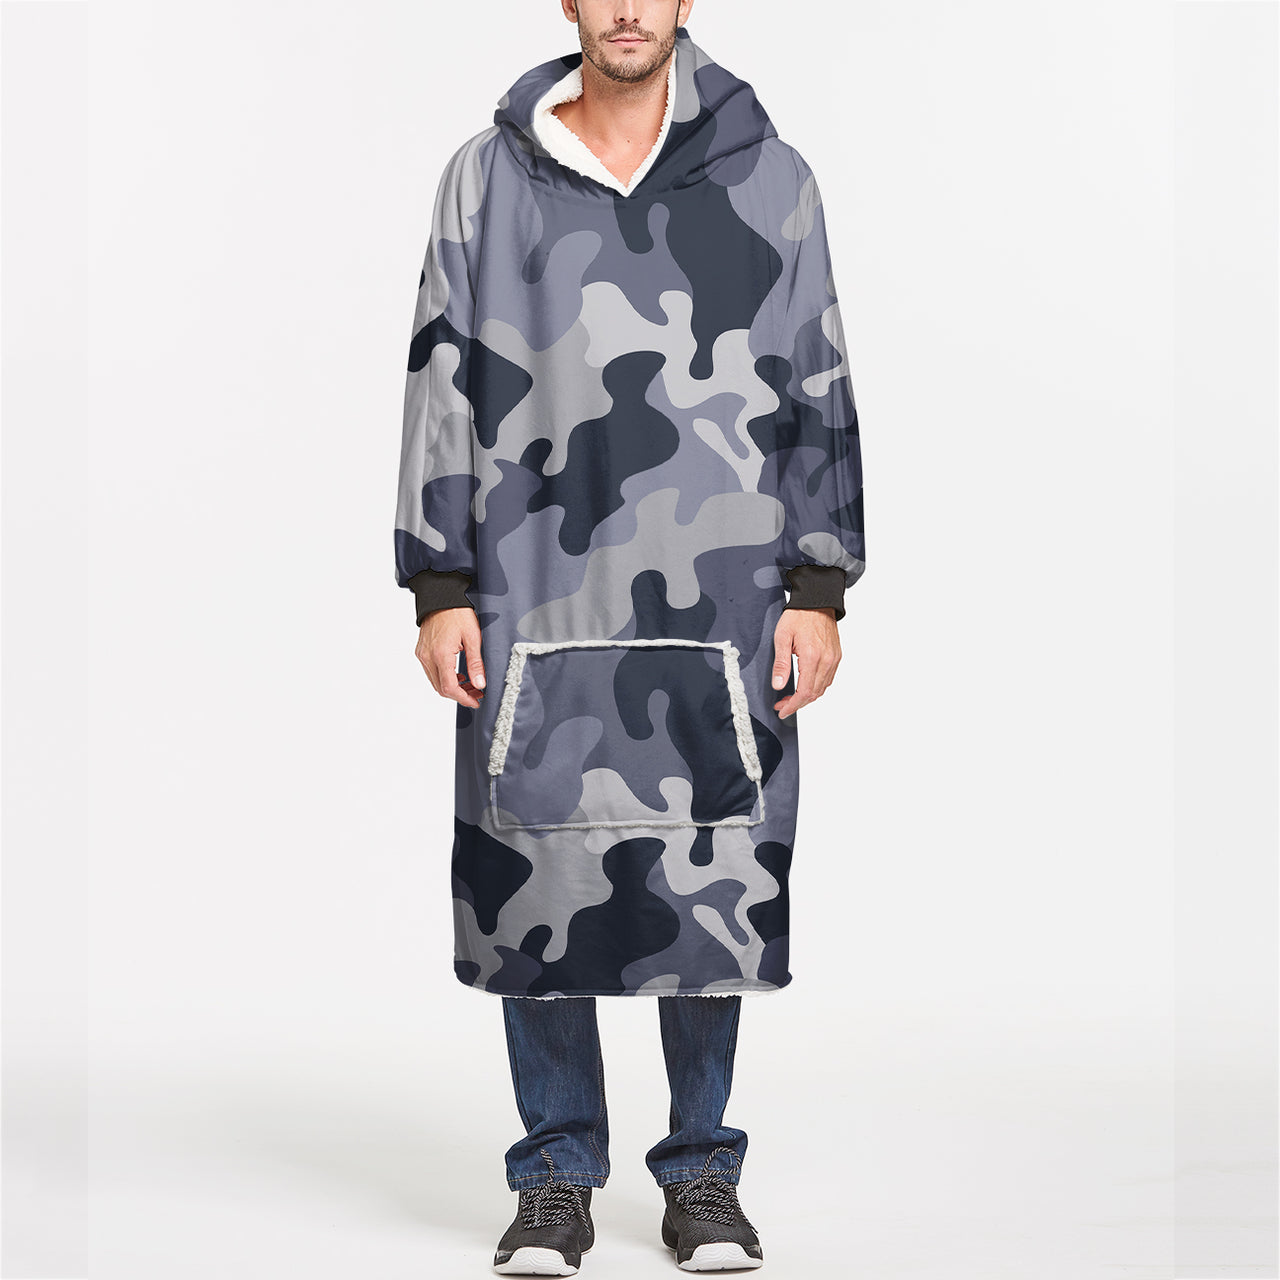 Military Camouflage Army Gray Designed Blanket Hoodies